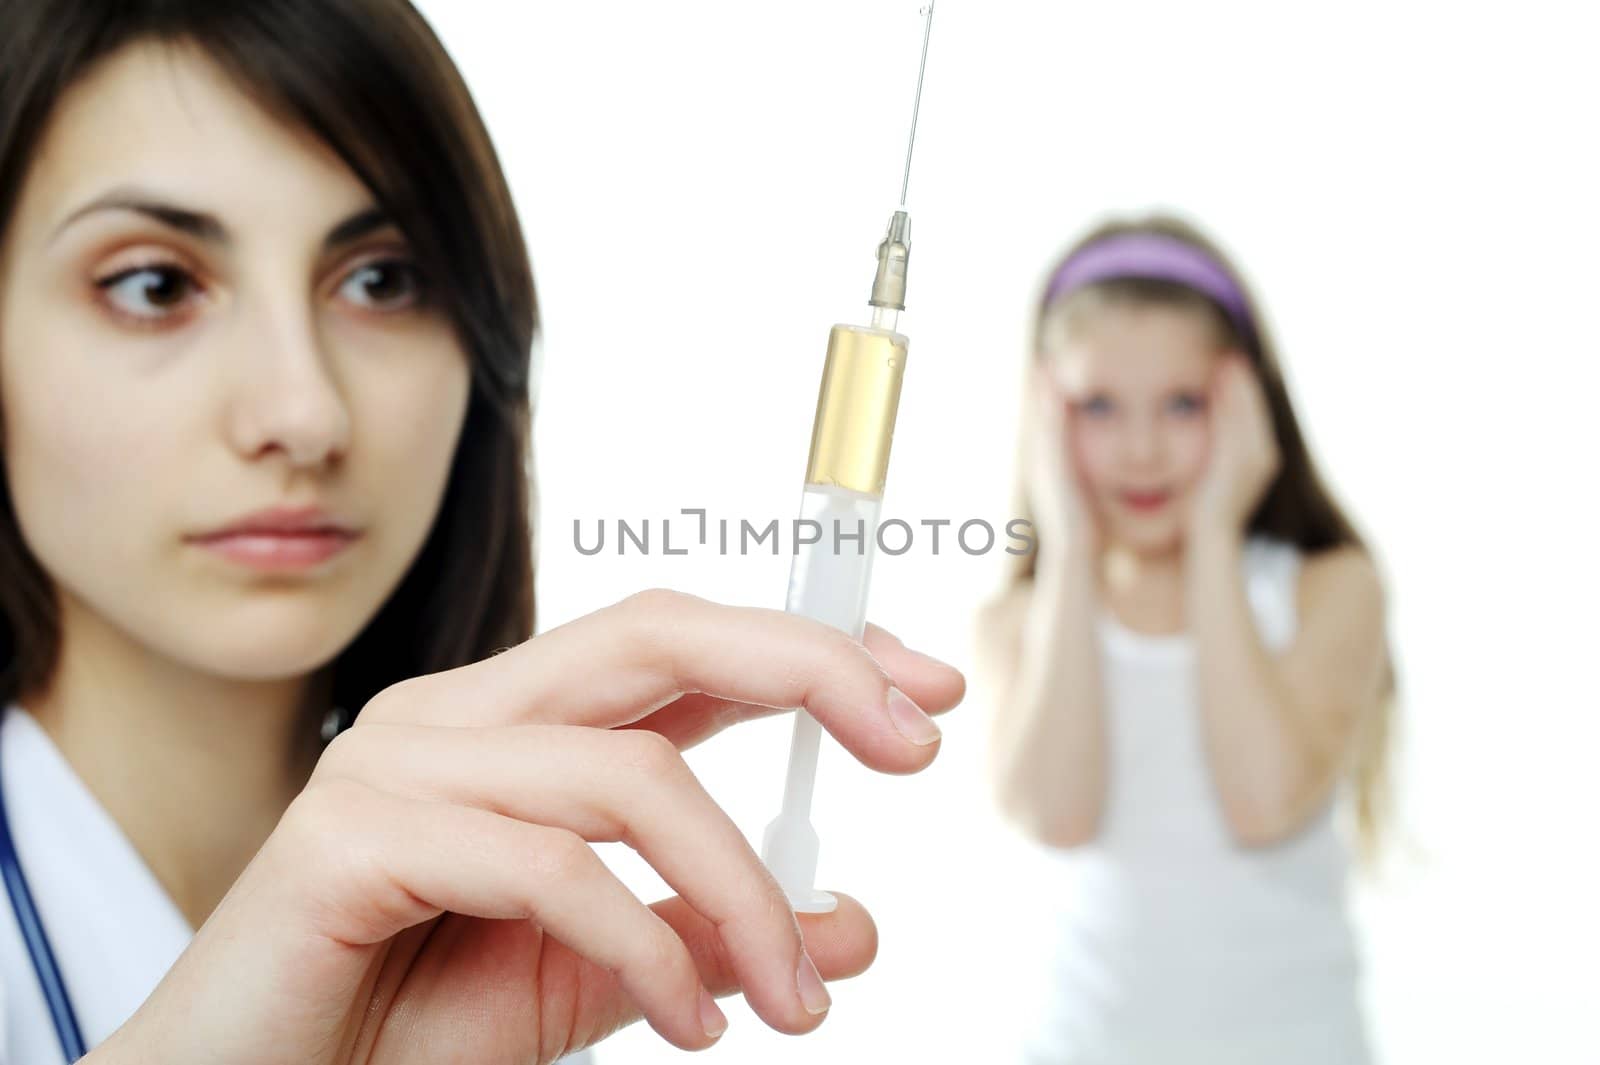 An image of a doctor getting ready to make an injection to a child